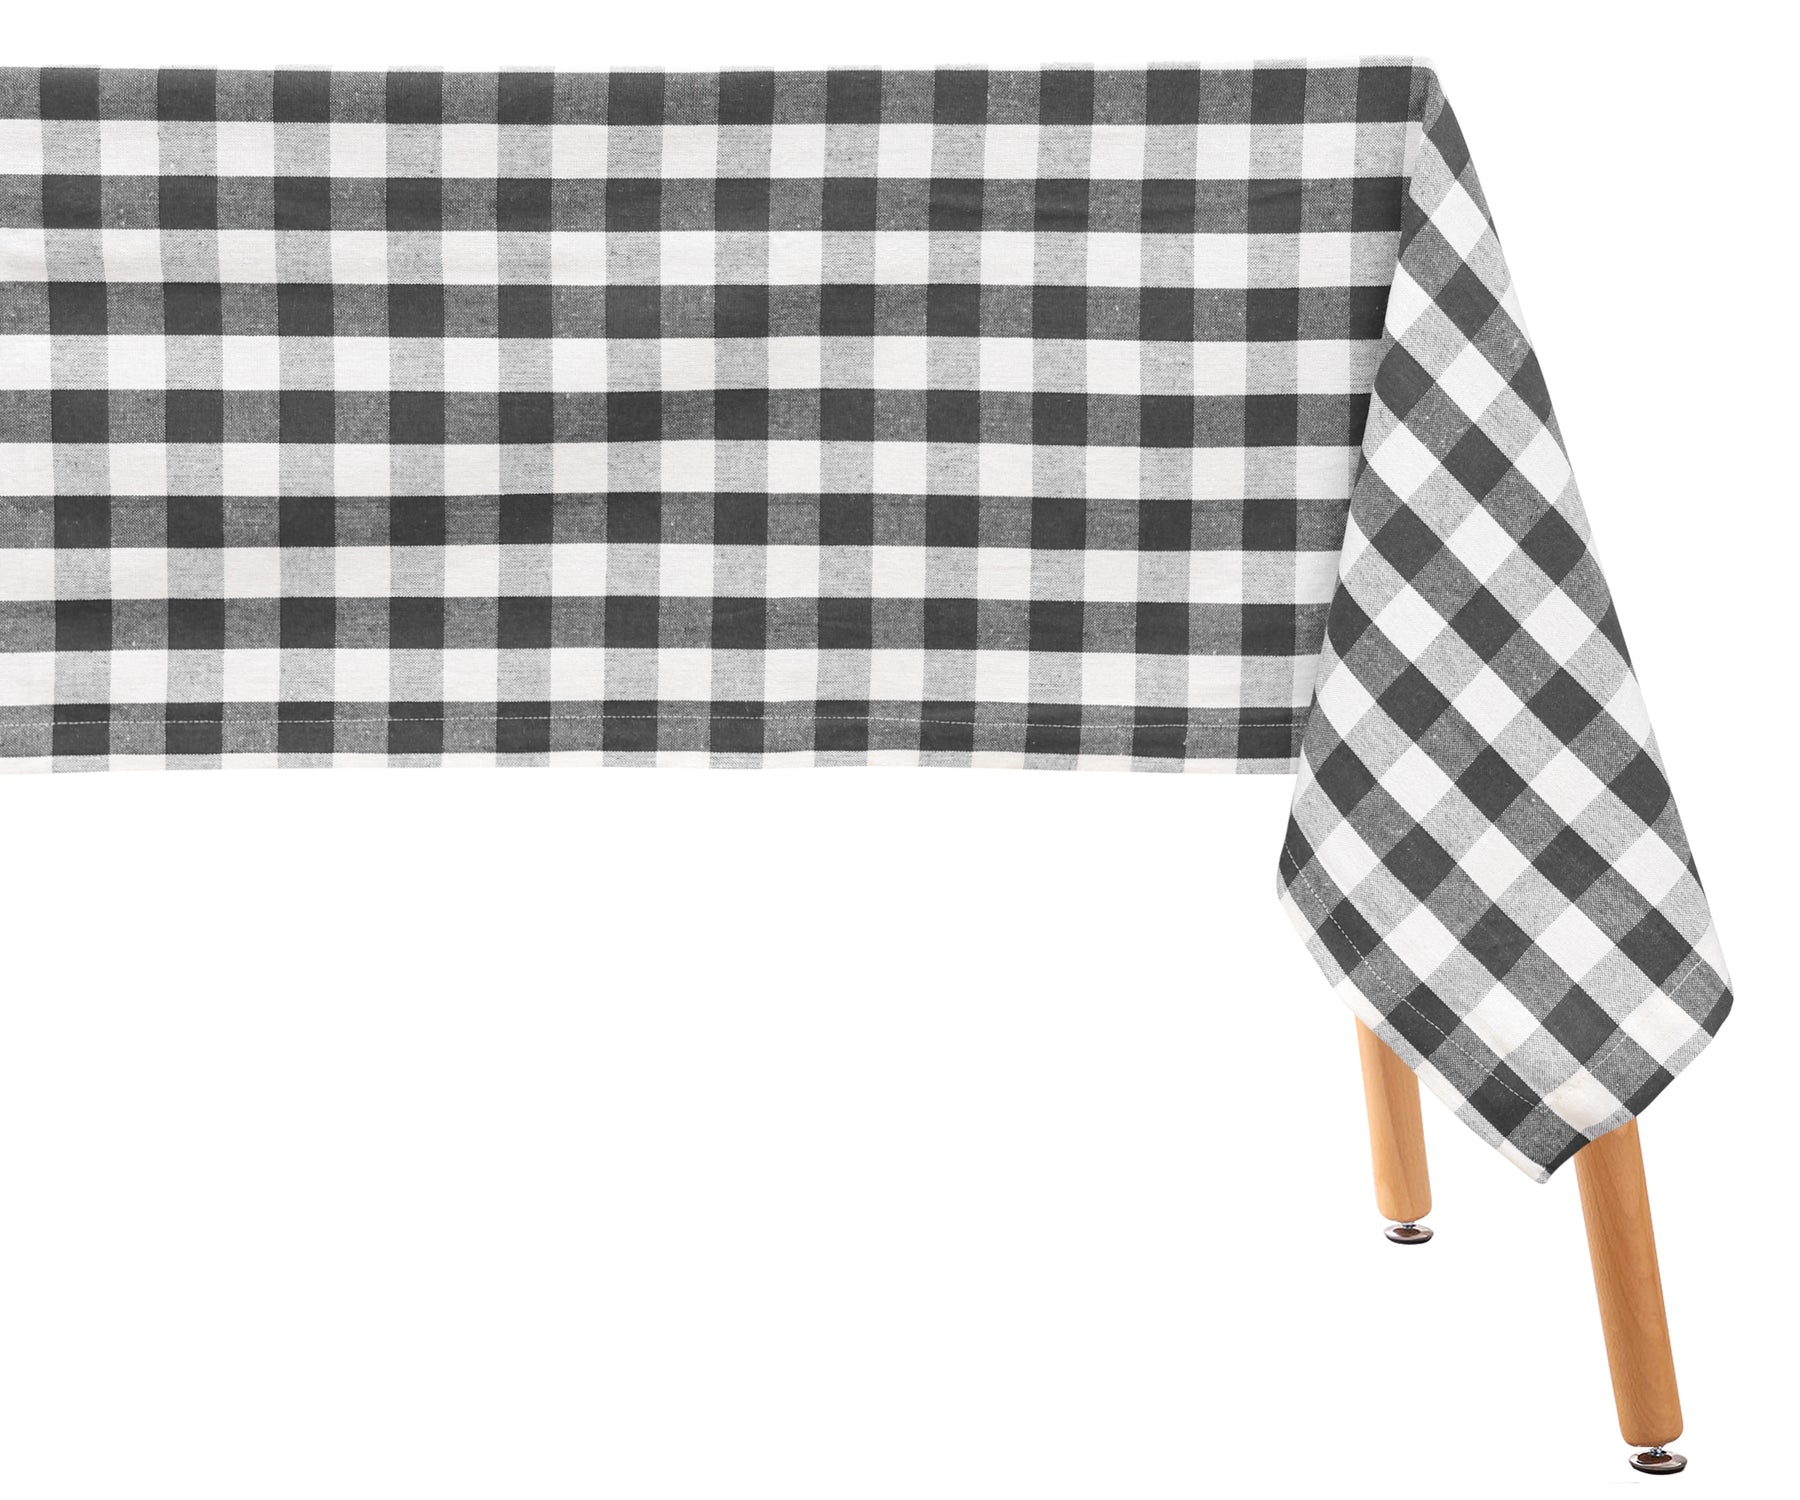 Checkered Tablecloth for timeless charm on your dining table.